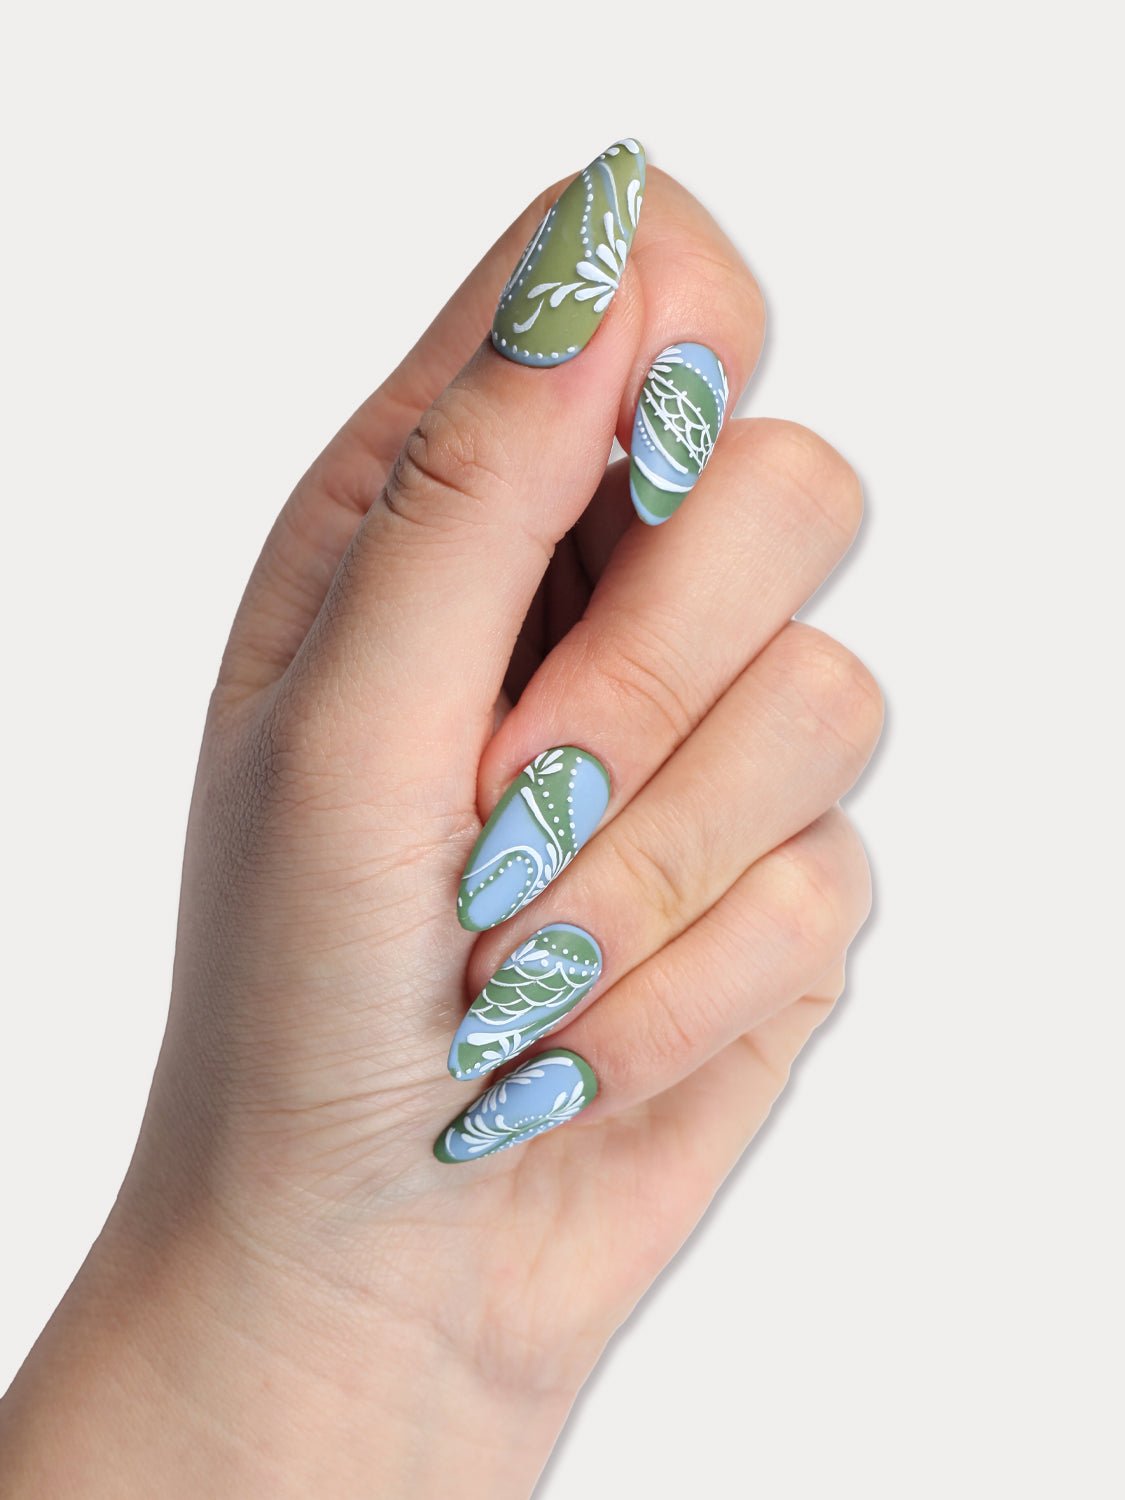 MIEAP Boho Lace press on nail set is meticulously hand-painted by master nail designers. The intricate Bohemian-inspired patterns showcase the artists' exceptional craftsmanship. With lace-like Boho patterns and a vintage blue-green base color, these nails possess a unique and charming appeal. #MIEAP #MIEAPnails #pressonnail #falsenail #acrylicnail #nails #nailart #naildesign #nailinspo #handmadenail #autumnnail #nail2023 #graduationnail #luxurynail #shortnail #ovalnail #mattenail  #datingnail #promnail